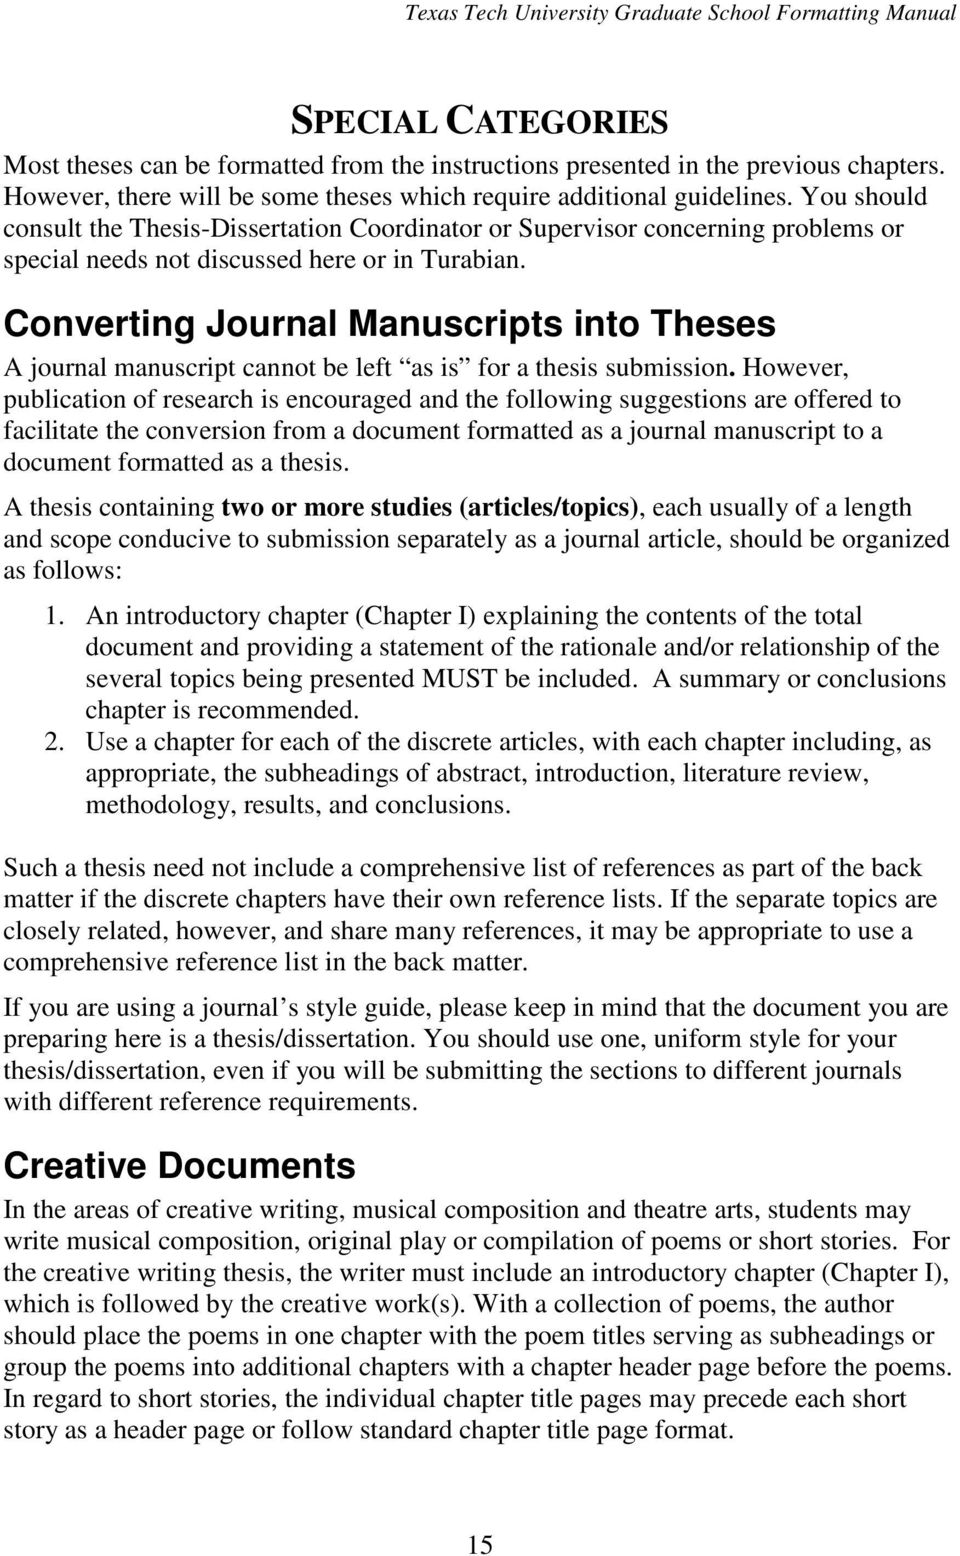 Converting Journal Manuscripts into Theses A journal manuscript cannot be left as is for a thesis submission.